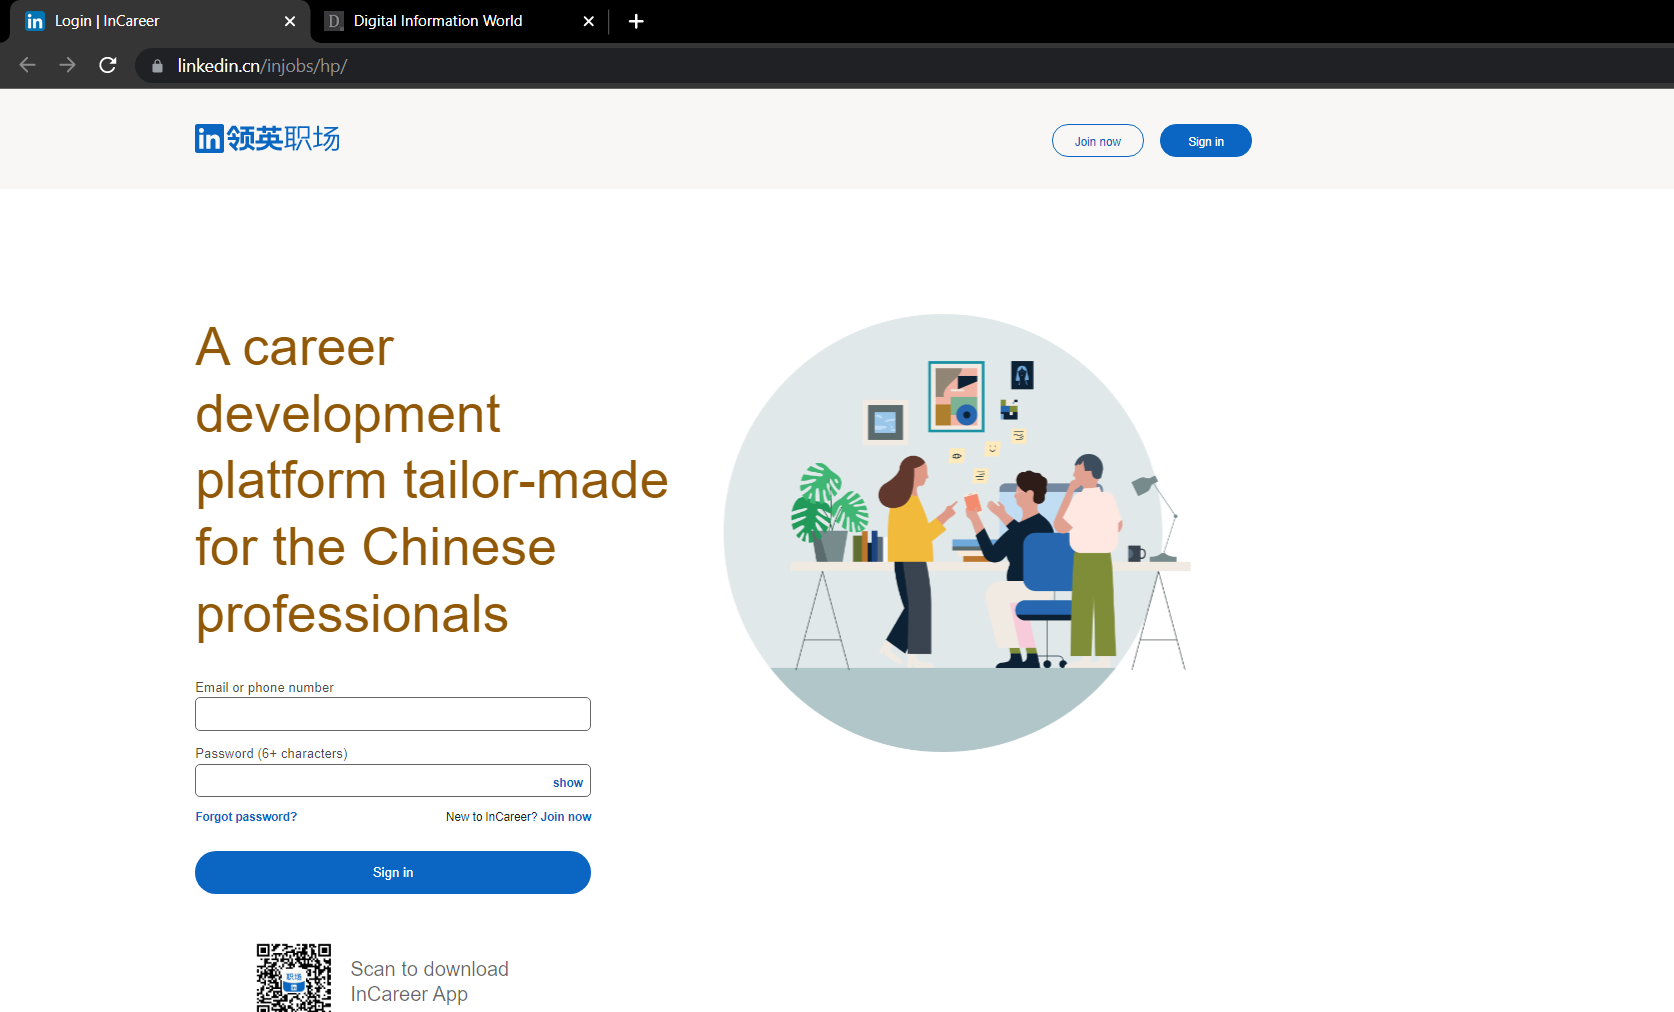 LinkedIn Launches New Service Called InCareer for Chinese Users / Digital Information World